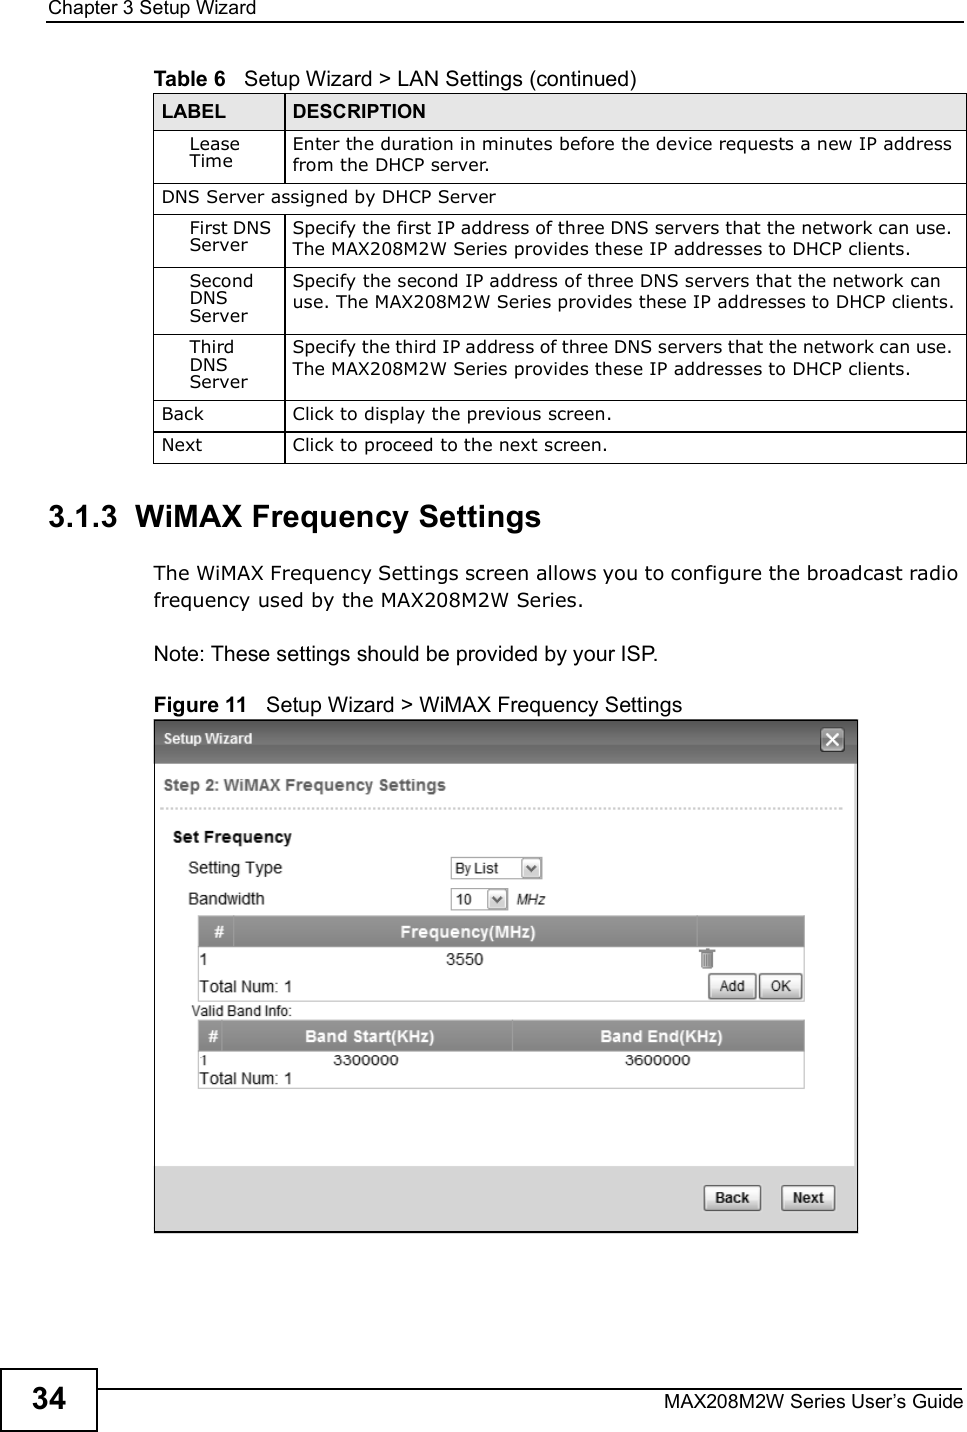 Chapter 3Setup WizardMAX208M2W Series User s Guide343.1.3  WiMAX Frequency SettingsThe WiMAX Frequency Settings screen allows you to configure the broadcast radio frequency used by the MAX208M2W Series.Note: These settings should be provided by your ISP.Figure 11   Setup Wizard &gt; WiMAX Frequency SettingsLease TimeEnter the duration in minutes before the device requests a new IP address from the DHCP server.DNS Server assigned by DHCP ServerFirst DNS ServerSpecify the first IP address of three DNS servers that the network can use. The MAX208M2W Series provides these IP addresses to DHCP clients.Second DNS ServerSpecify the second IP address of three DNS servers that the network can use. The MAX208M2W Series provides these IP addresses to DHCP clients.Third DNS ServerSpecify the third IP address of three DNS servers that the network can use. The MAX208M2W Series provides these IP addresses to DHCP clients.Back Click to display the previous screen.Next Click to proceed to the next screen. Table 6   Setup Wizard &gt; LAN Settings (continued)LABEL DESCRIPTION